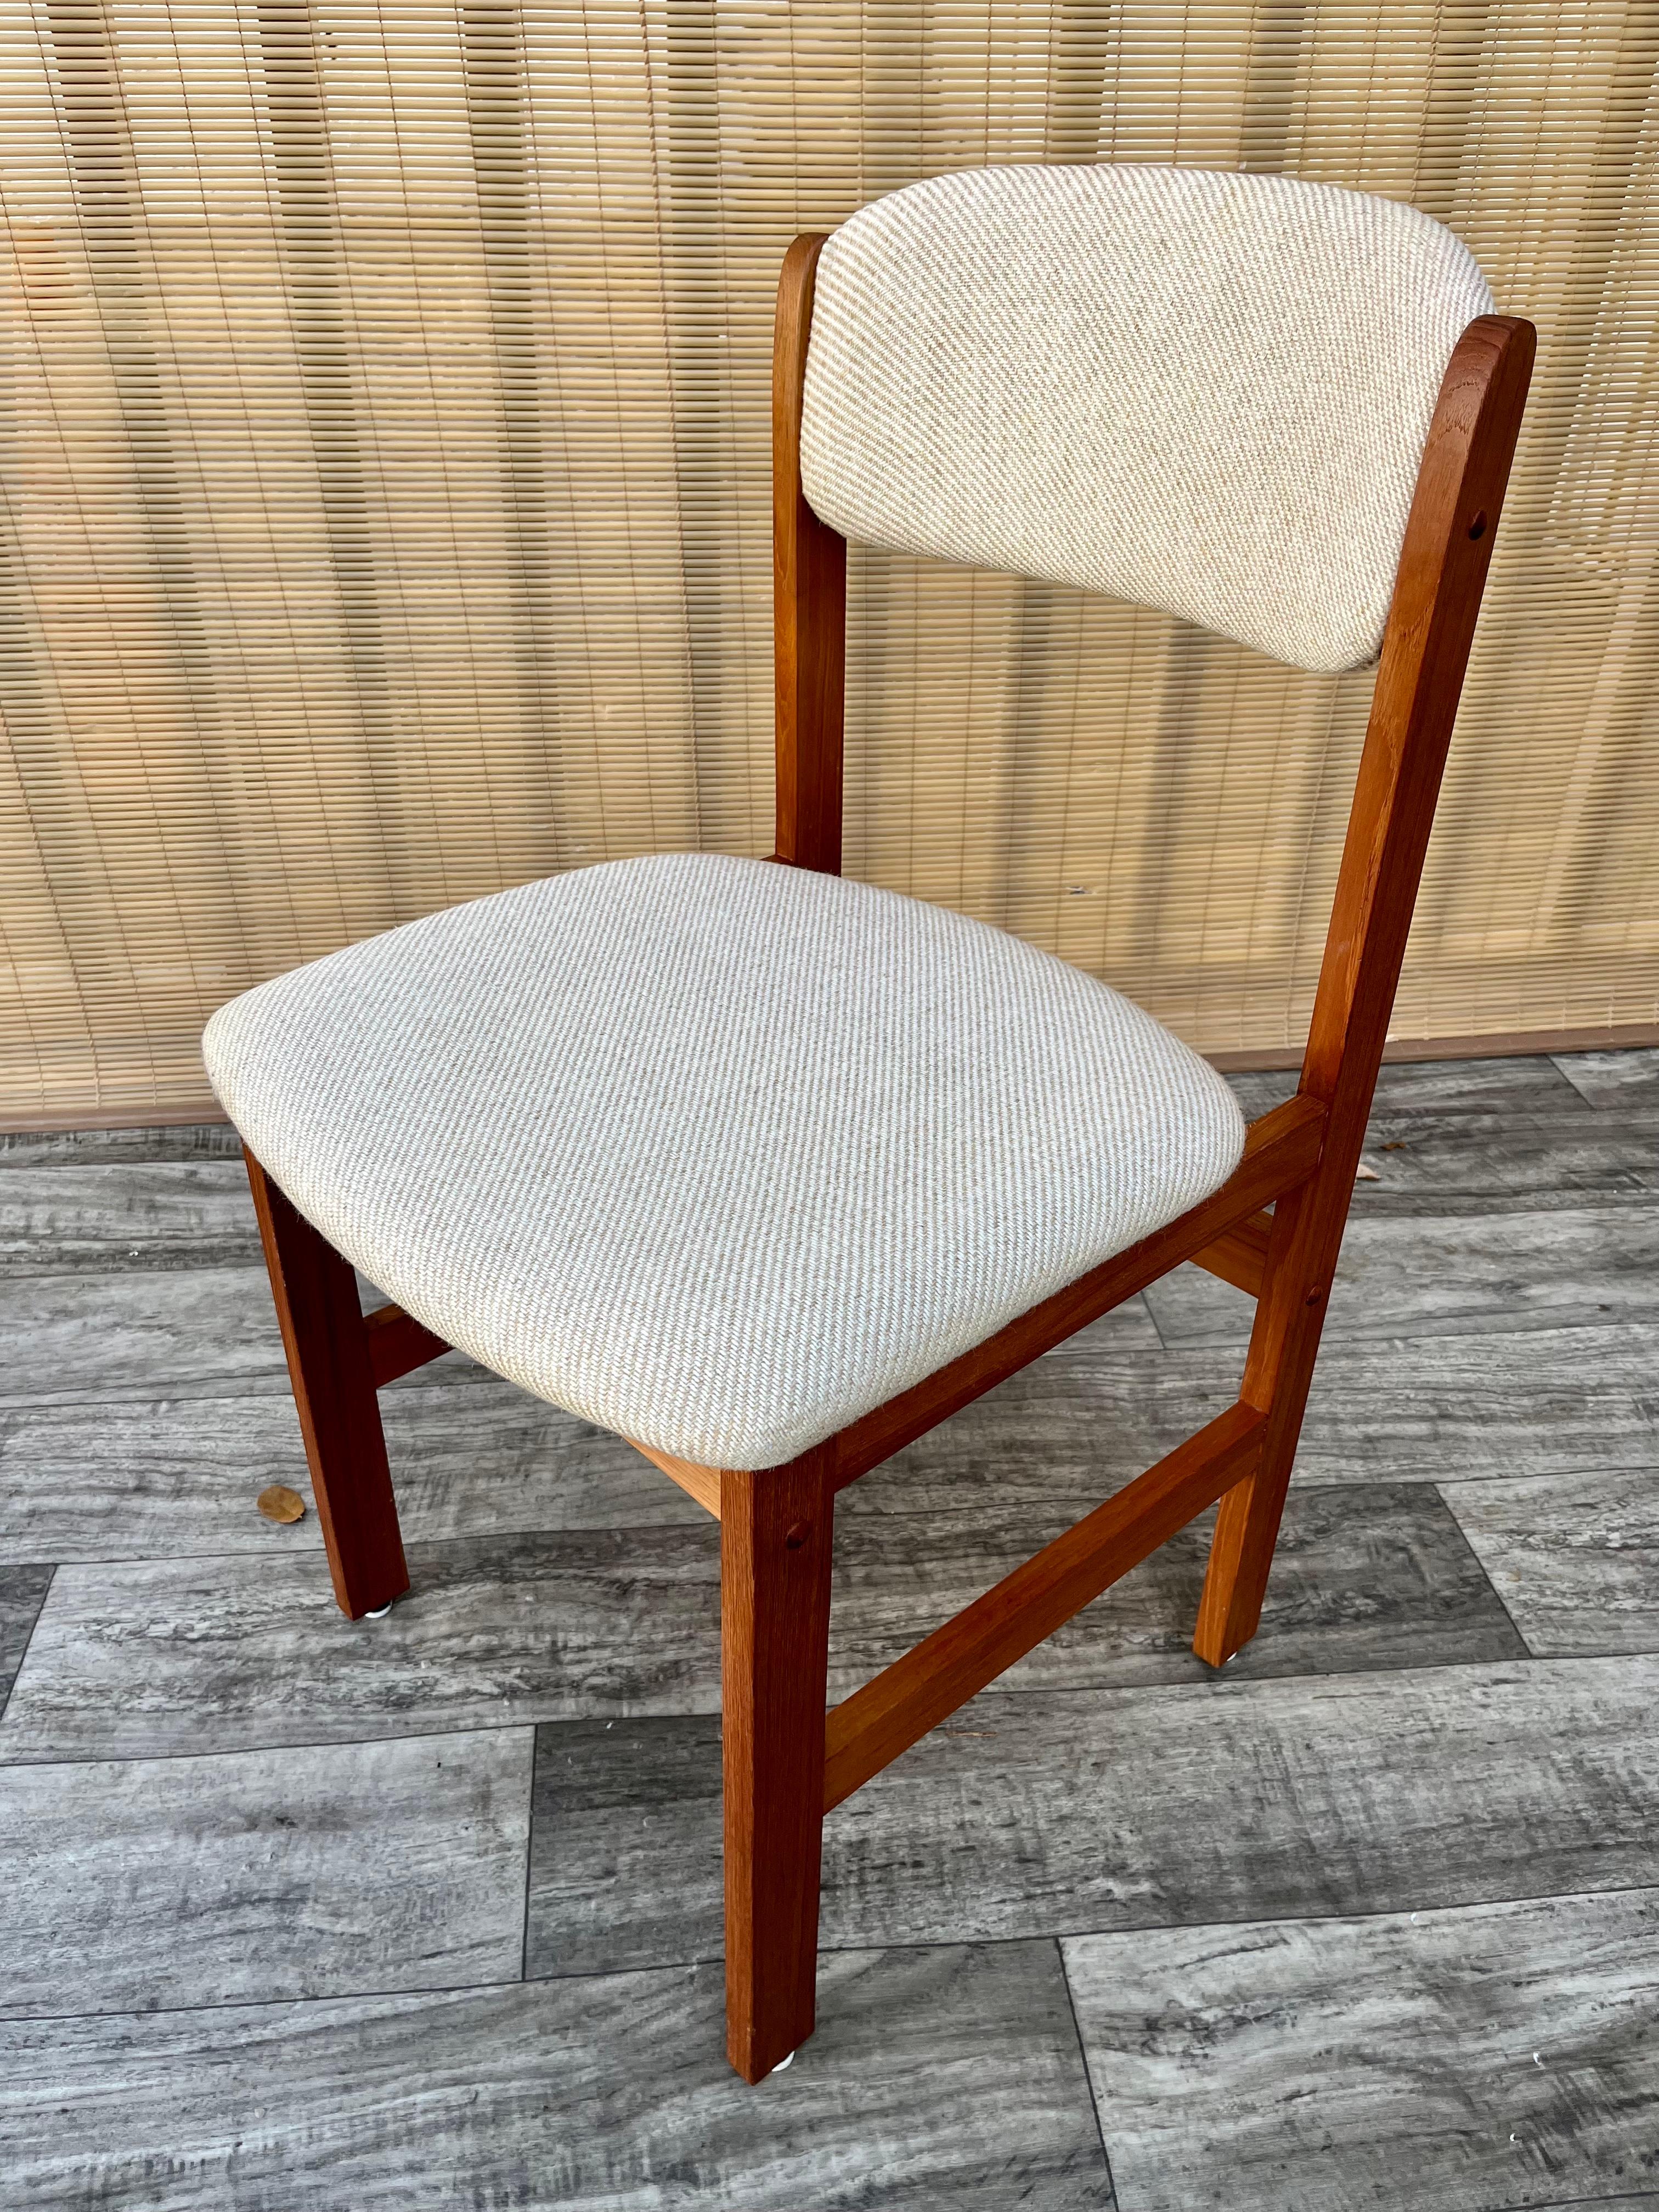 Upholstery Set of four Mid-Century Danish Modern Style Dining Chairs by Benny Linden Design For Sale